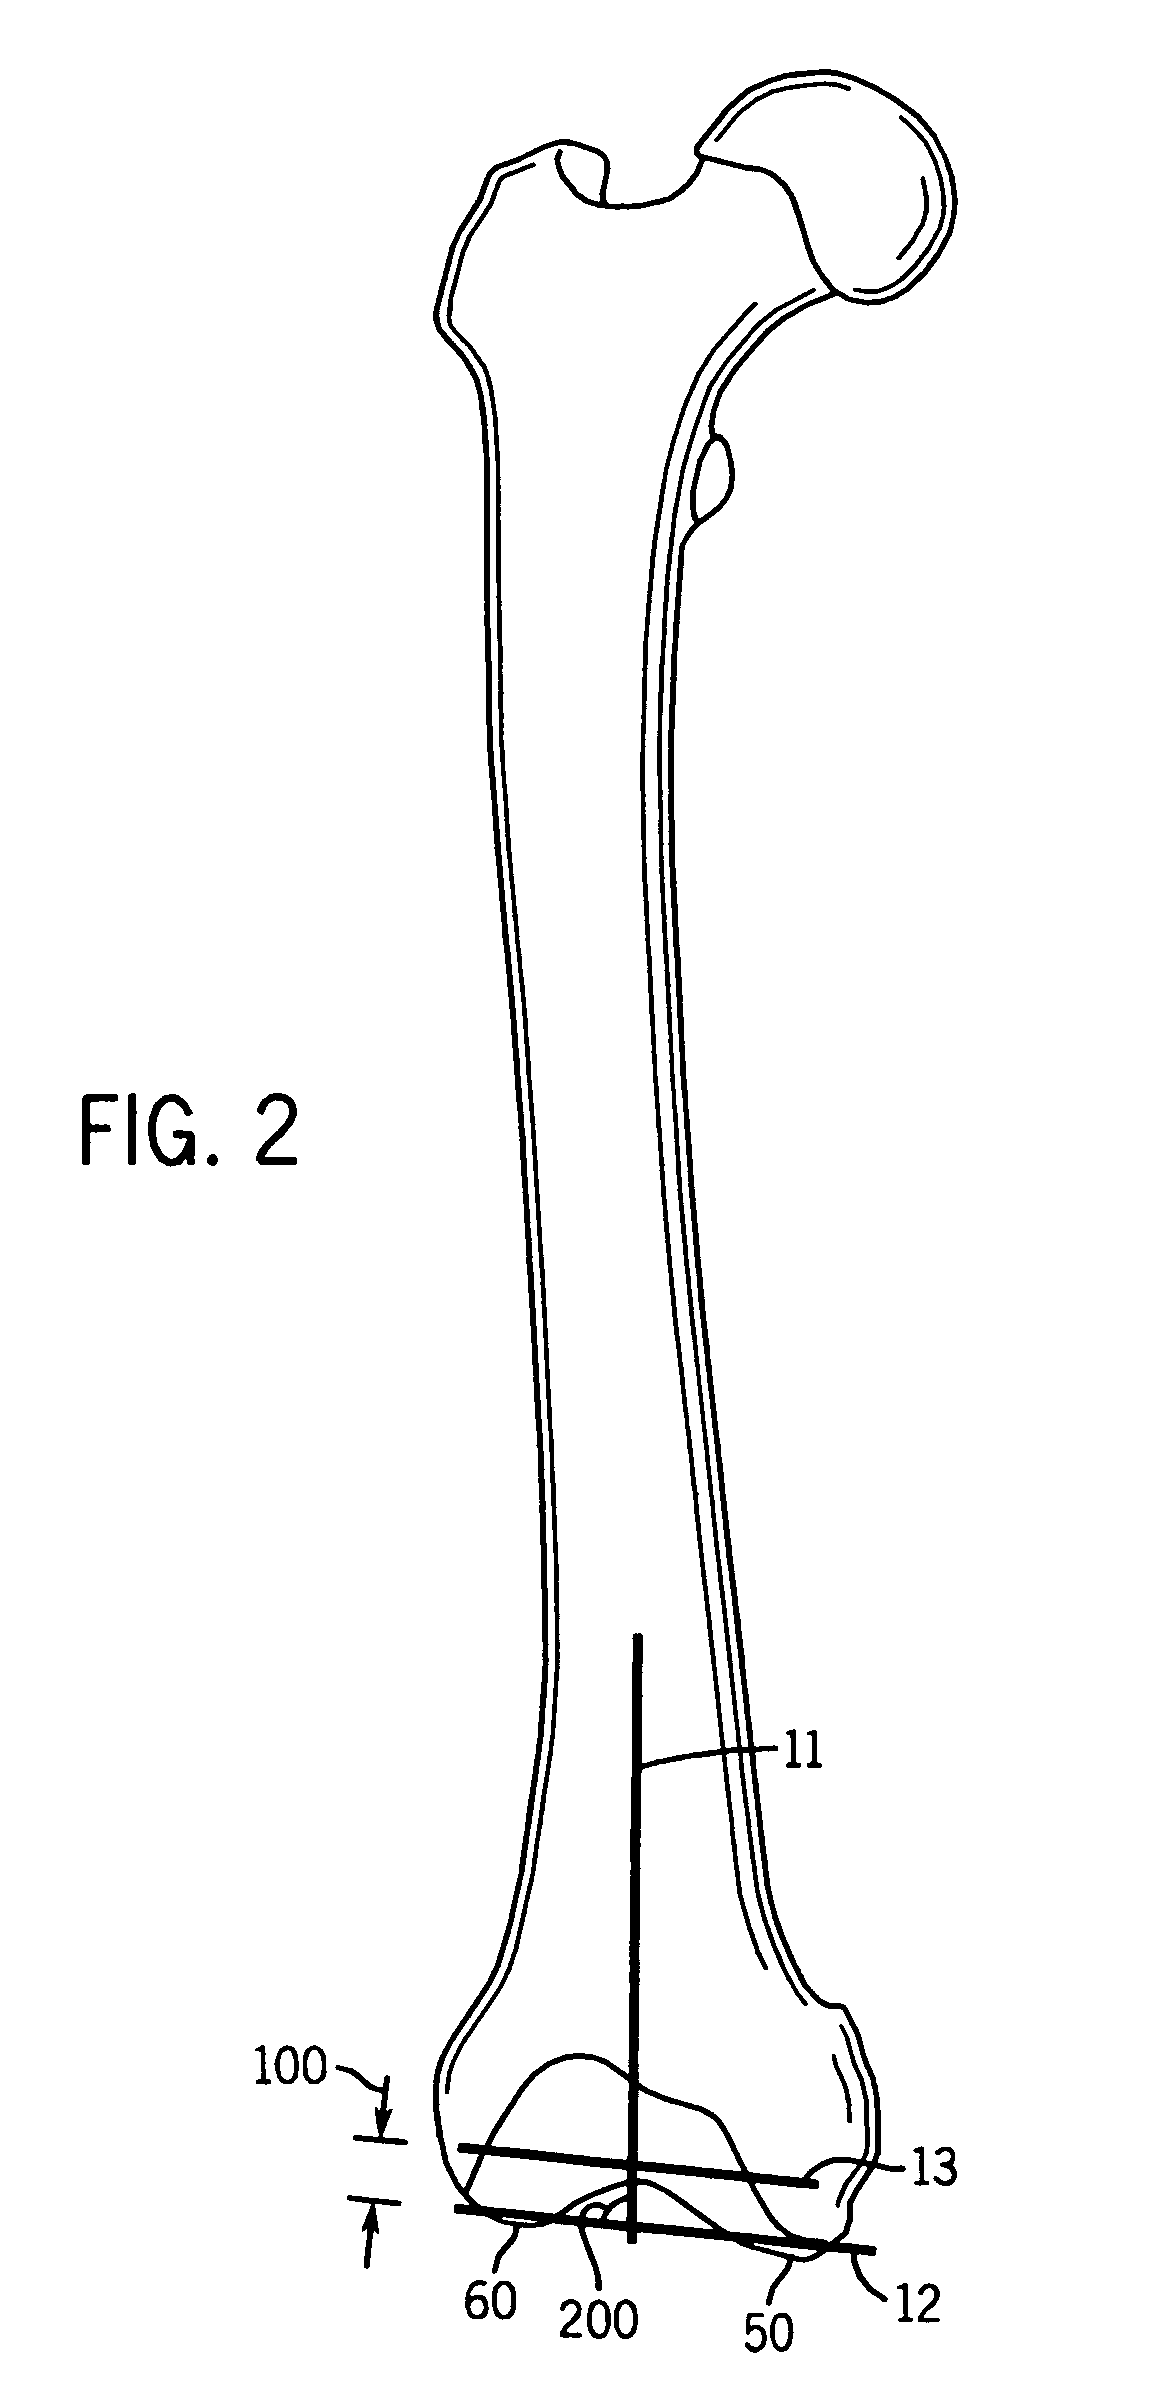 Method and system for determining resection guidelines for joint replacement surgical procedures